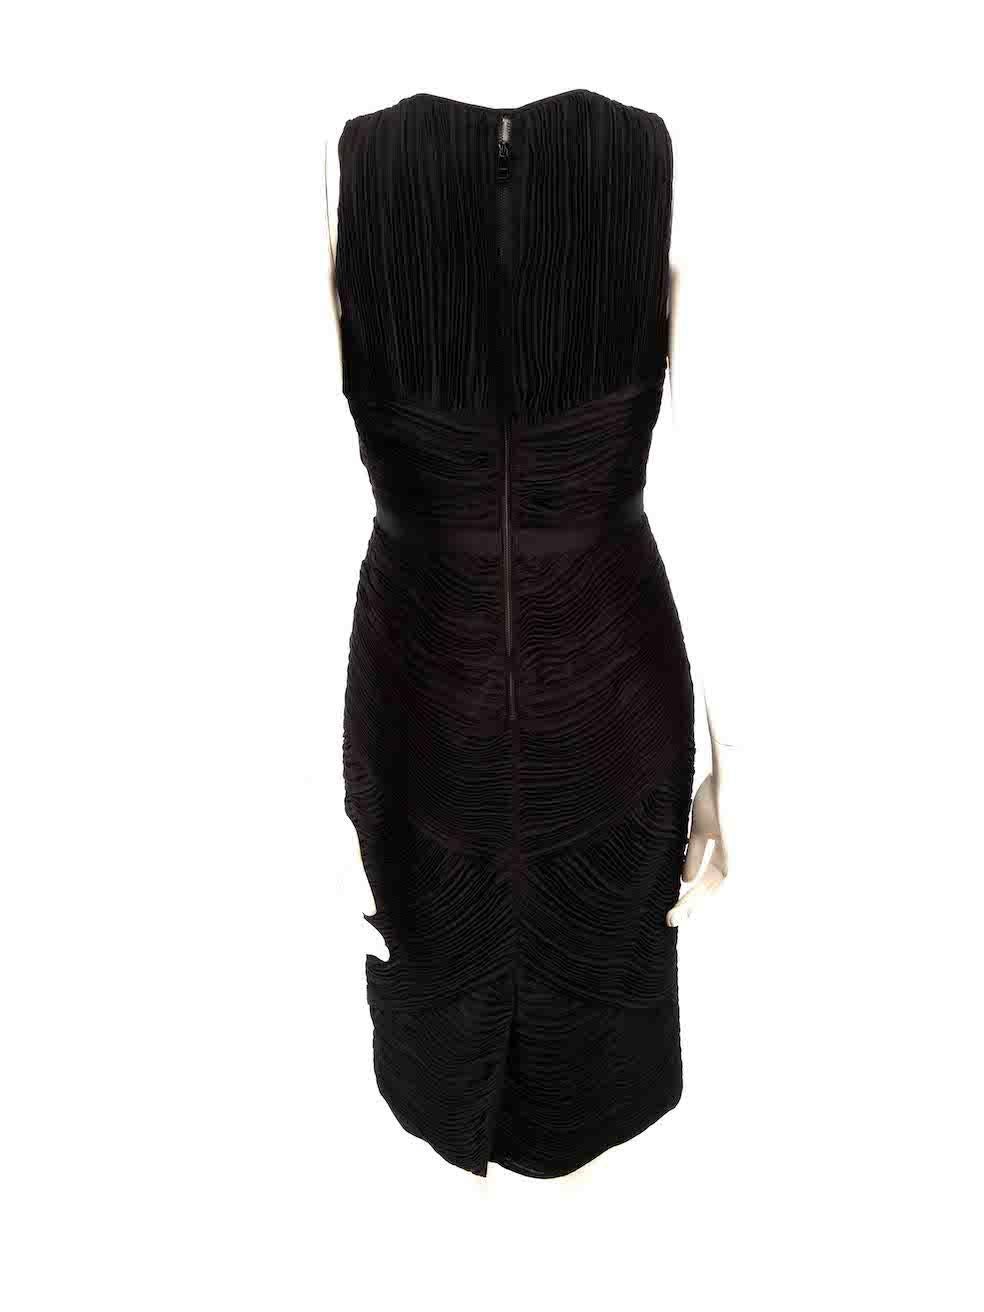 Burberry Black Ruched Pleat Knee Length Dress Size M In Good Condition For Sale In London, GB